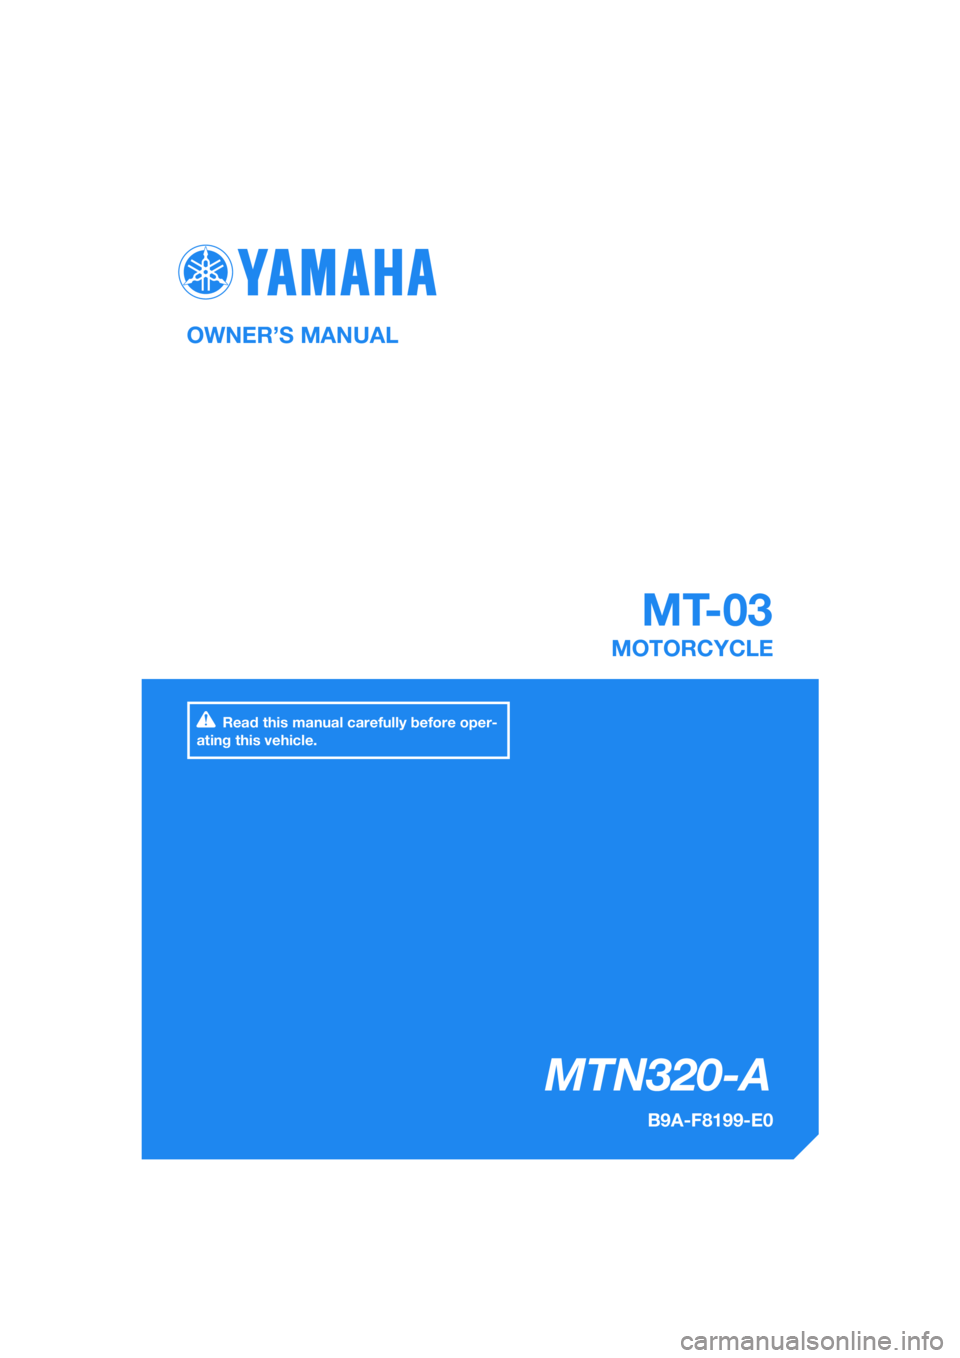 YAMAHA MT-03 2018  Owners Manual DIC183
MT-03
   MTN320-A
OWNER’S MANUAL
B9A-F8199-E0
MOTORCYCLE
[English  (E)]
Read this manual carefully before oper-
ating this vehicle. 